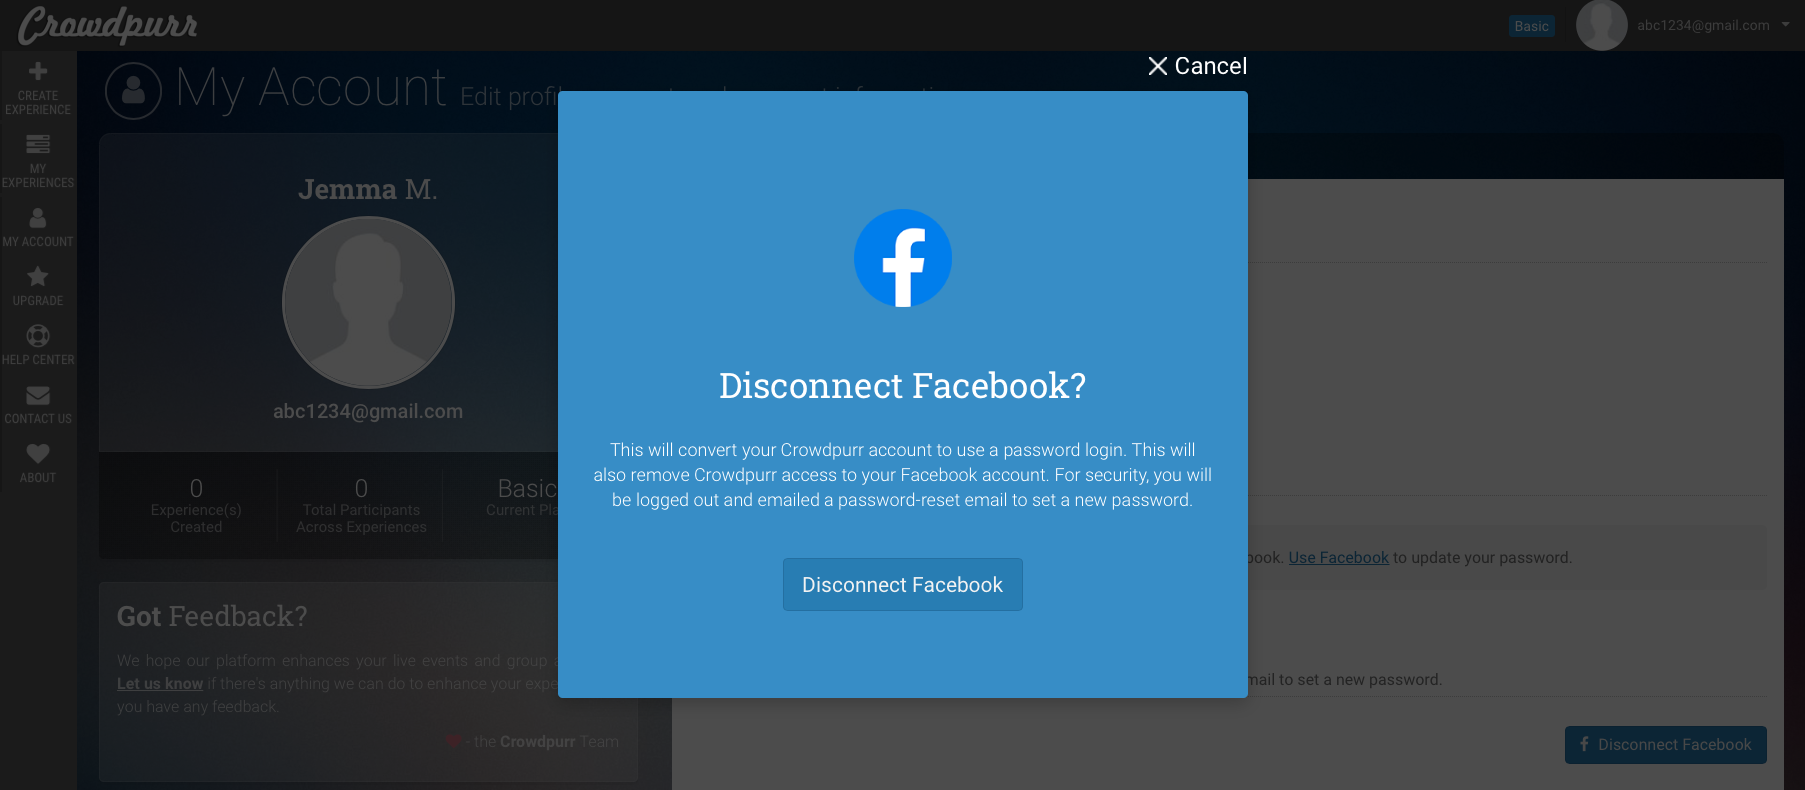 Disconnect_Facebook_Prompt.png